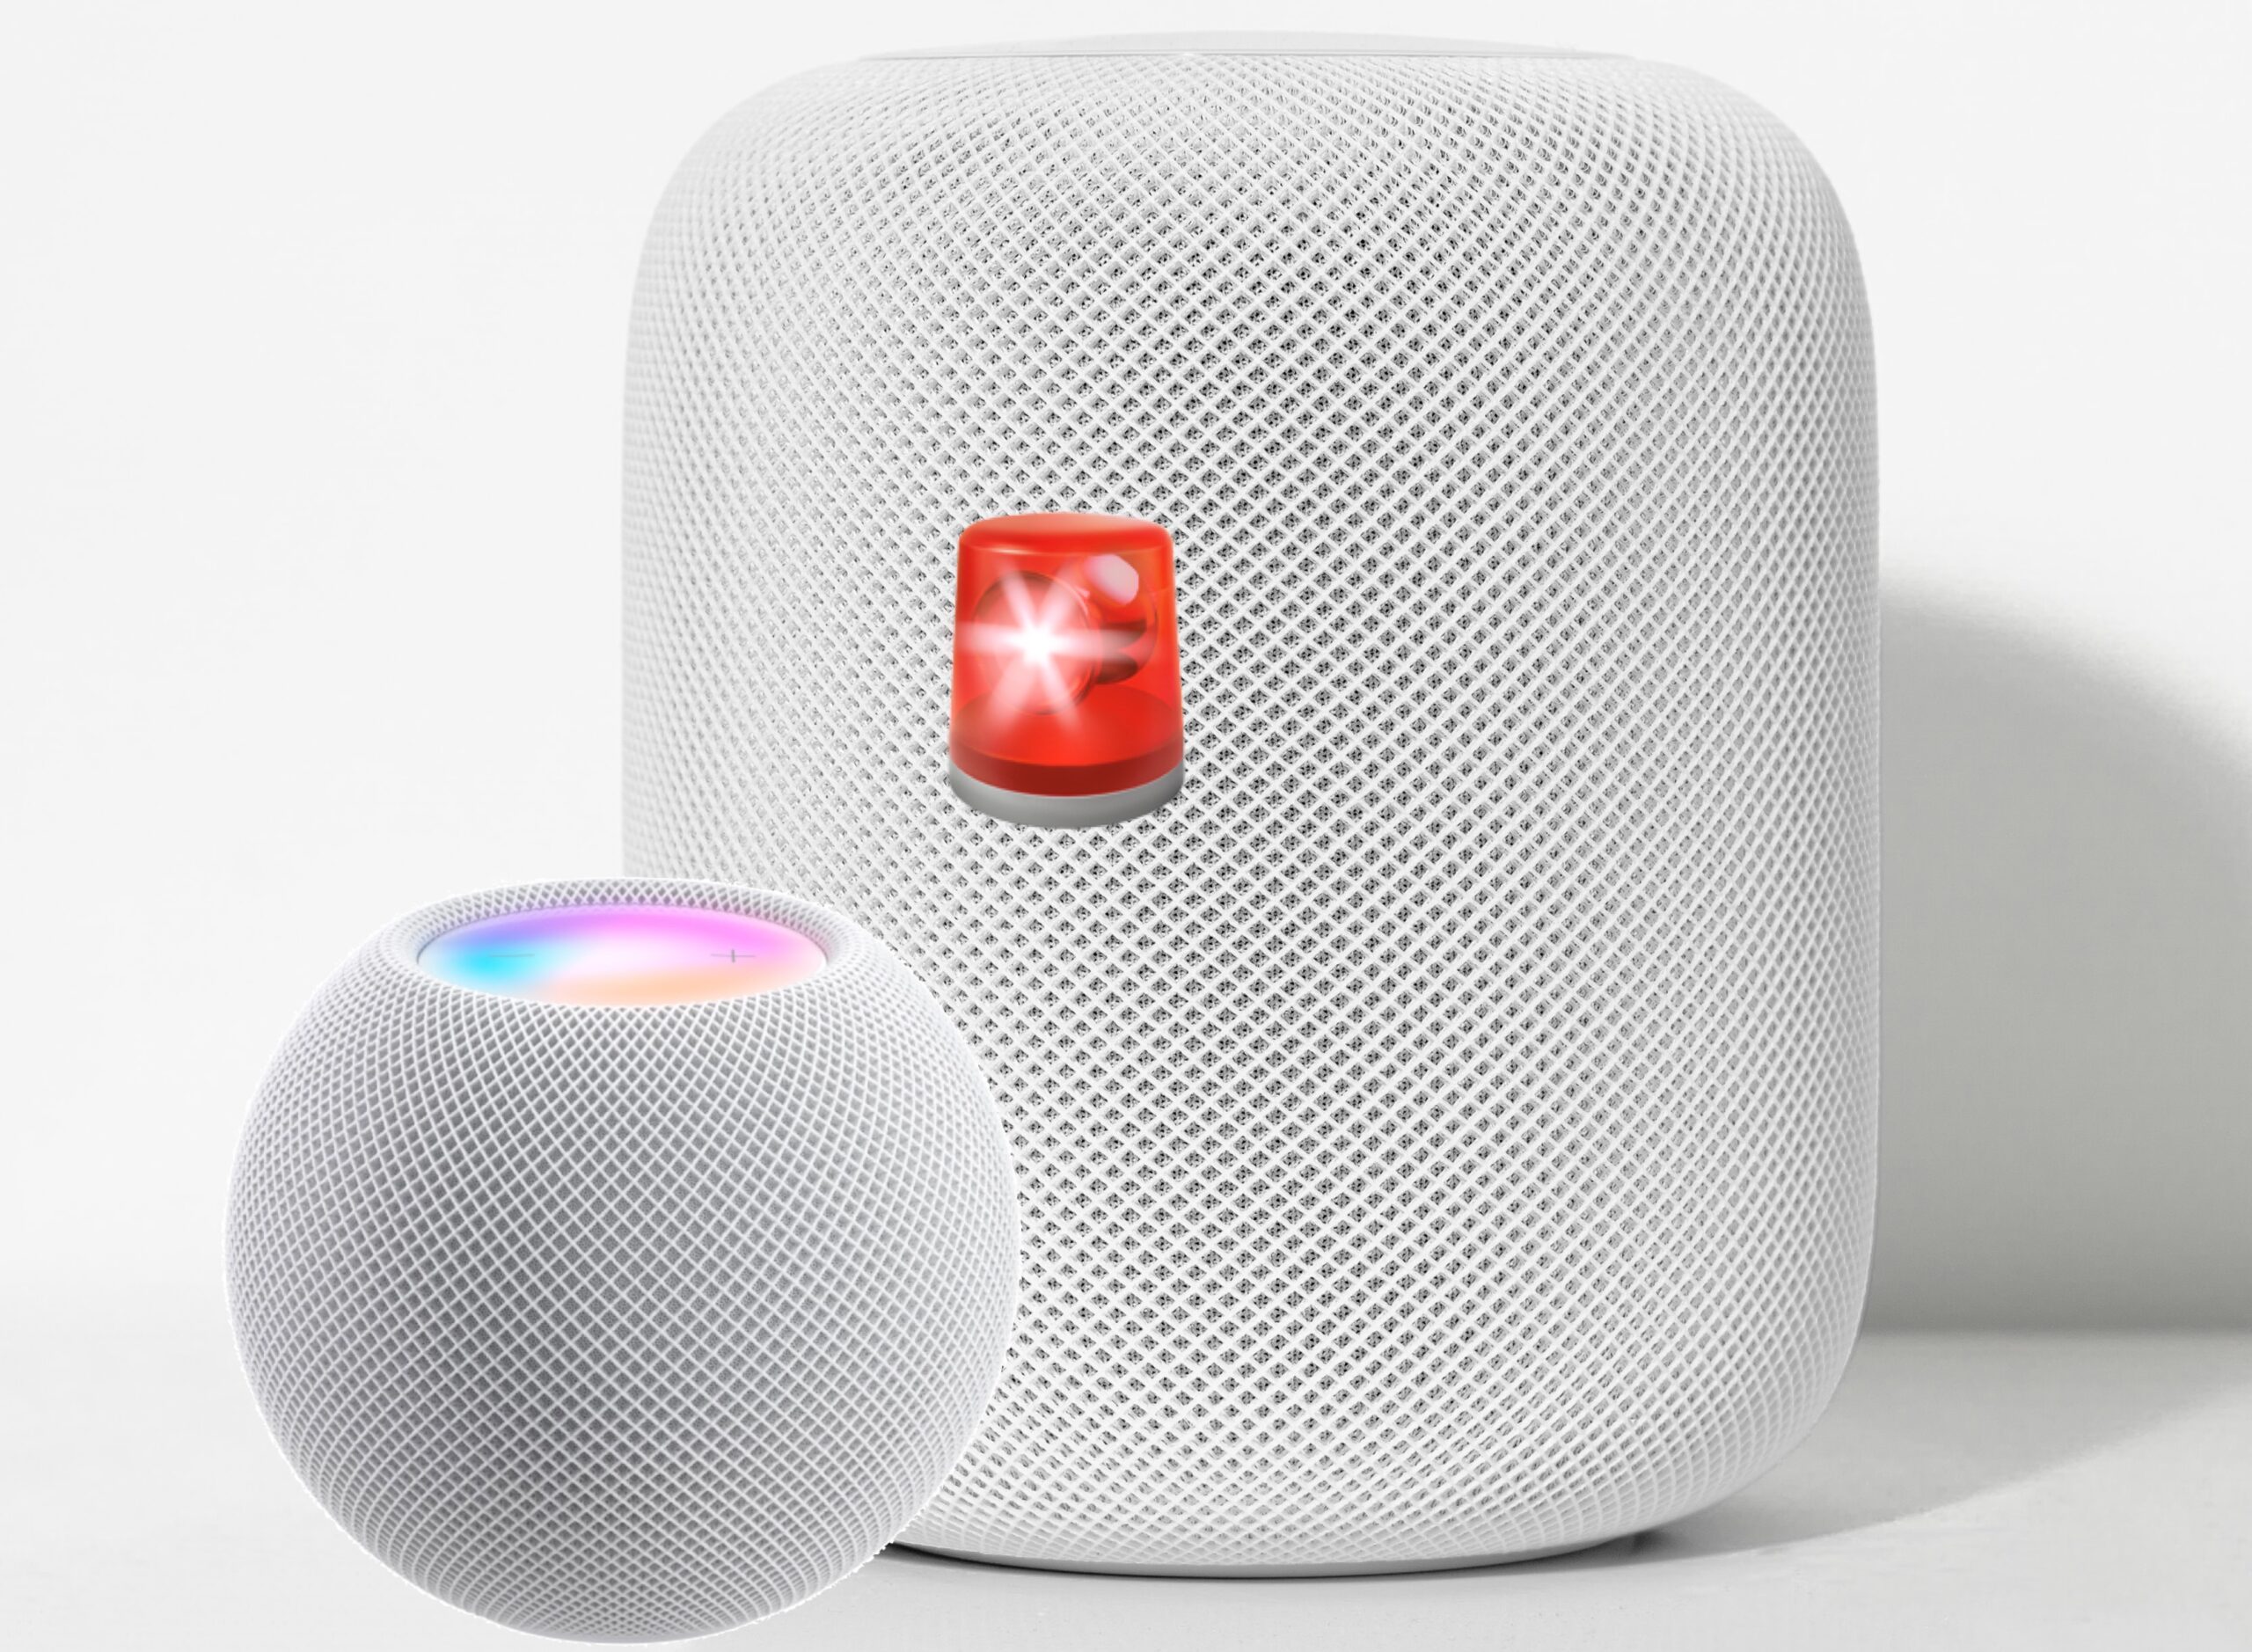 How to Get Alerts if Smoke Alarm is Detected by Homepod